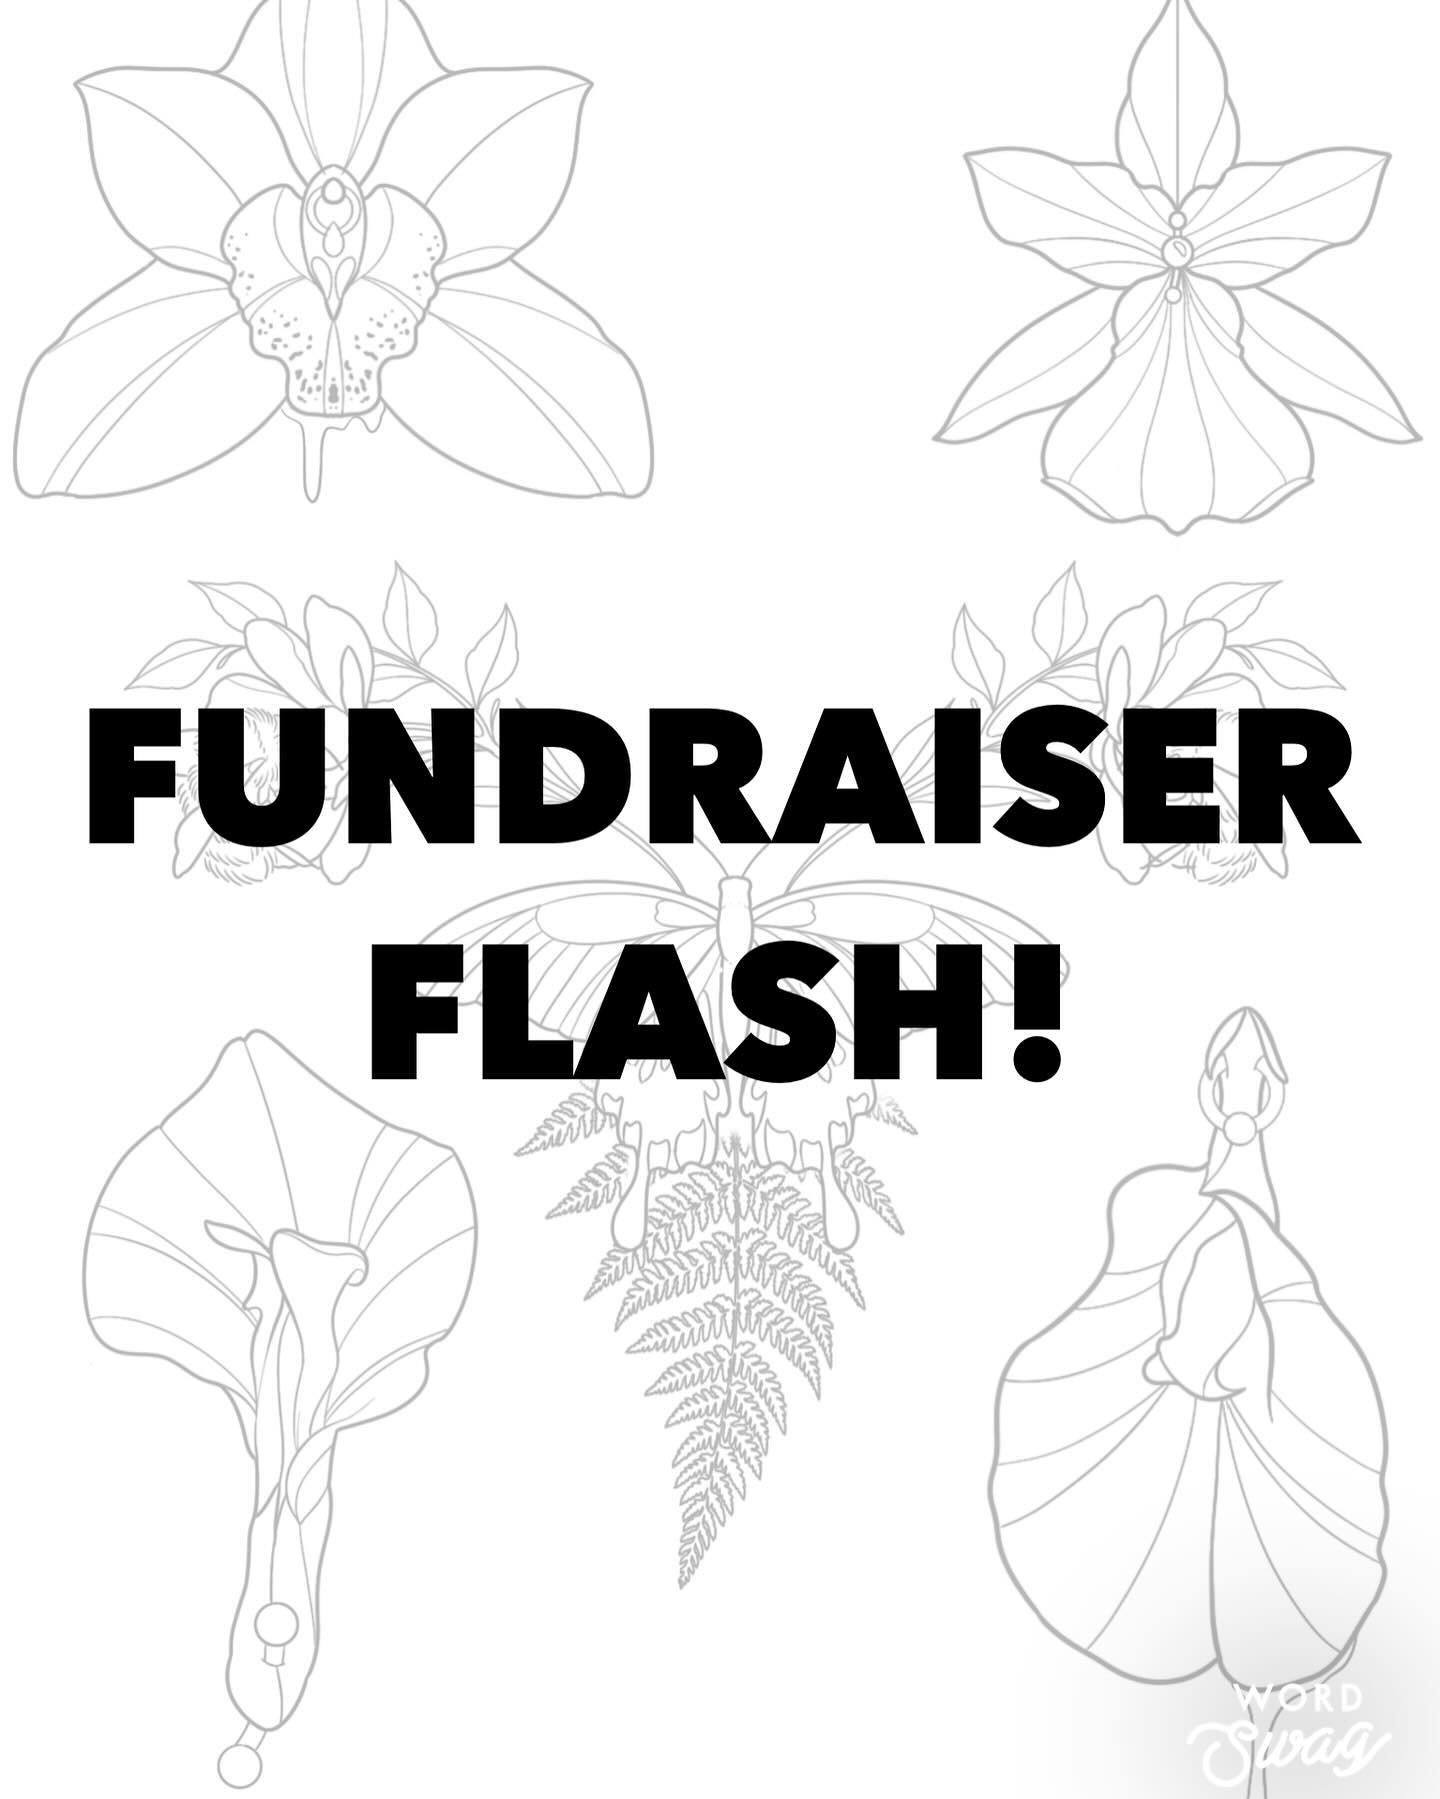 Here&rsquo;s a sample of some of the flash available for tomorrow&rsquo;s Flash Day Fundraiser for Planned Parenthood and The Endometriosis Research Center. 50% of all proceeds will be donated to the nonprofit of your choice! All of our flash book de